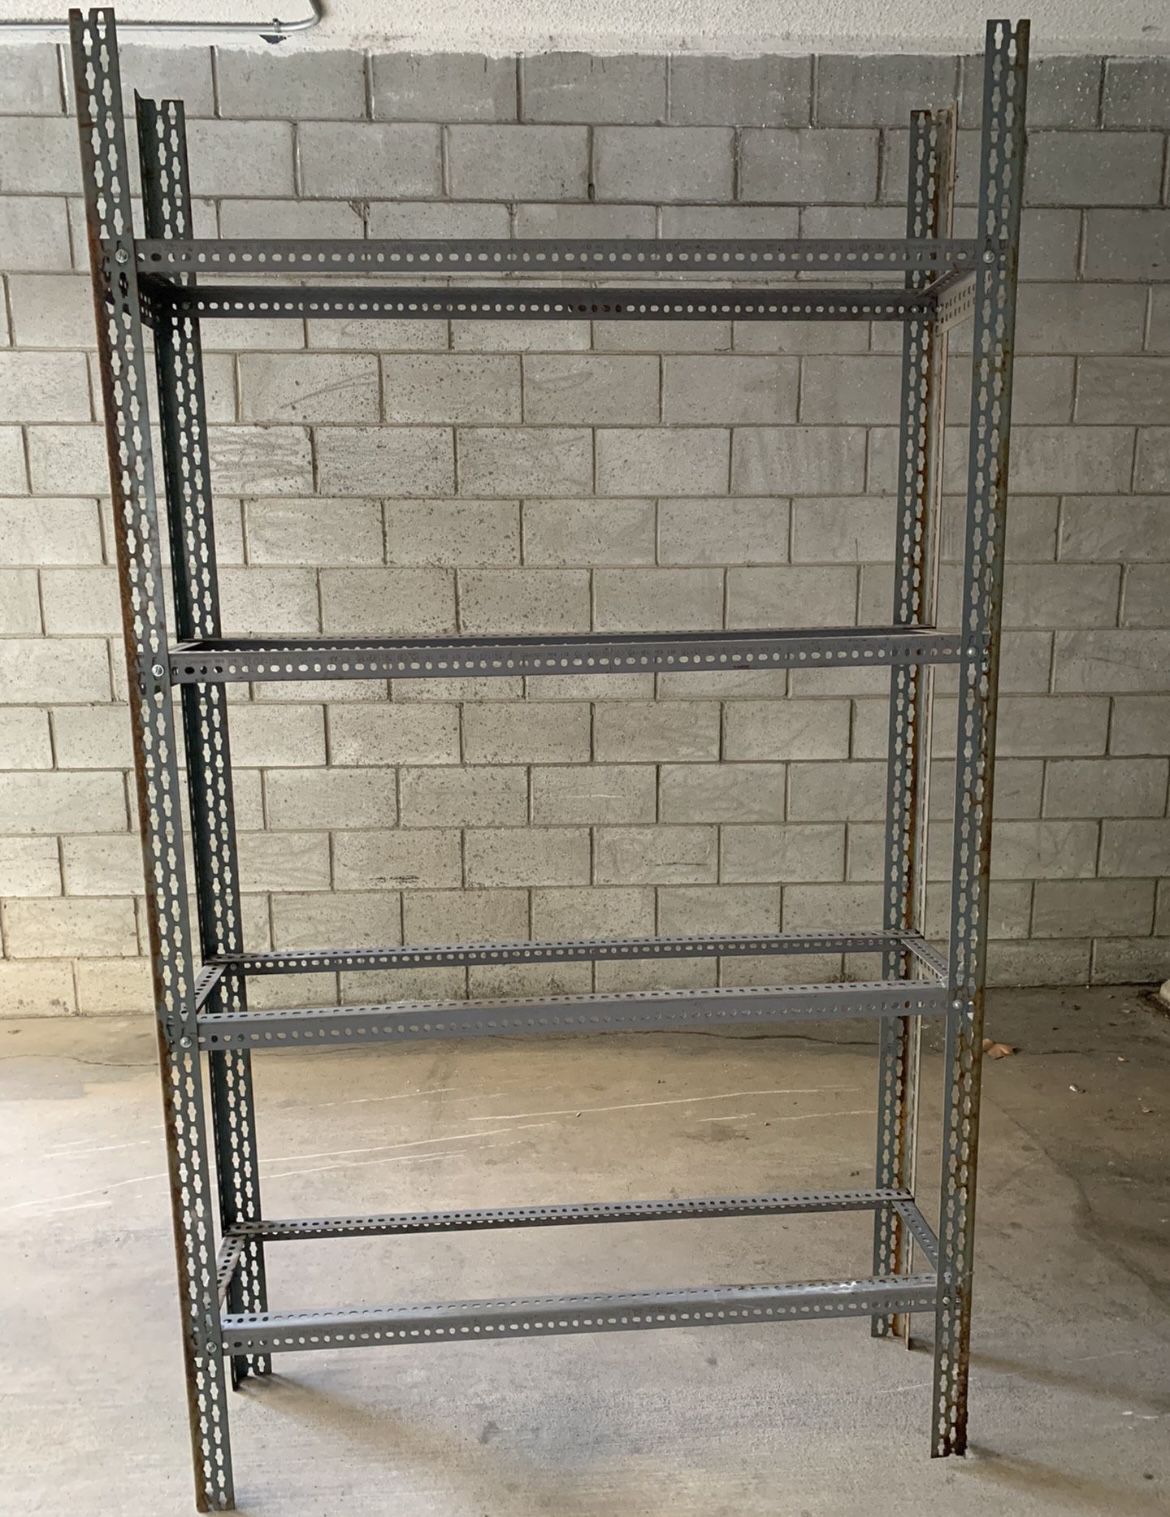 3 Metal Shelves For Business Inventory Organization 